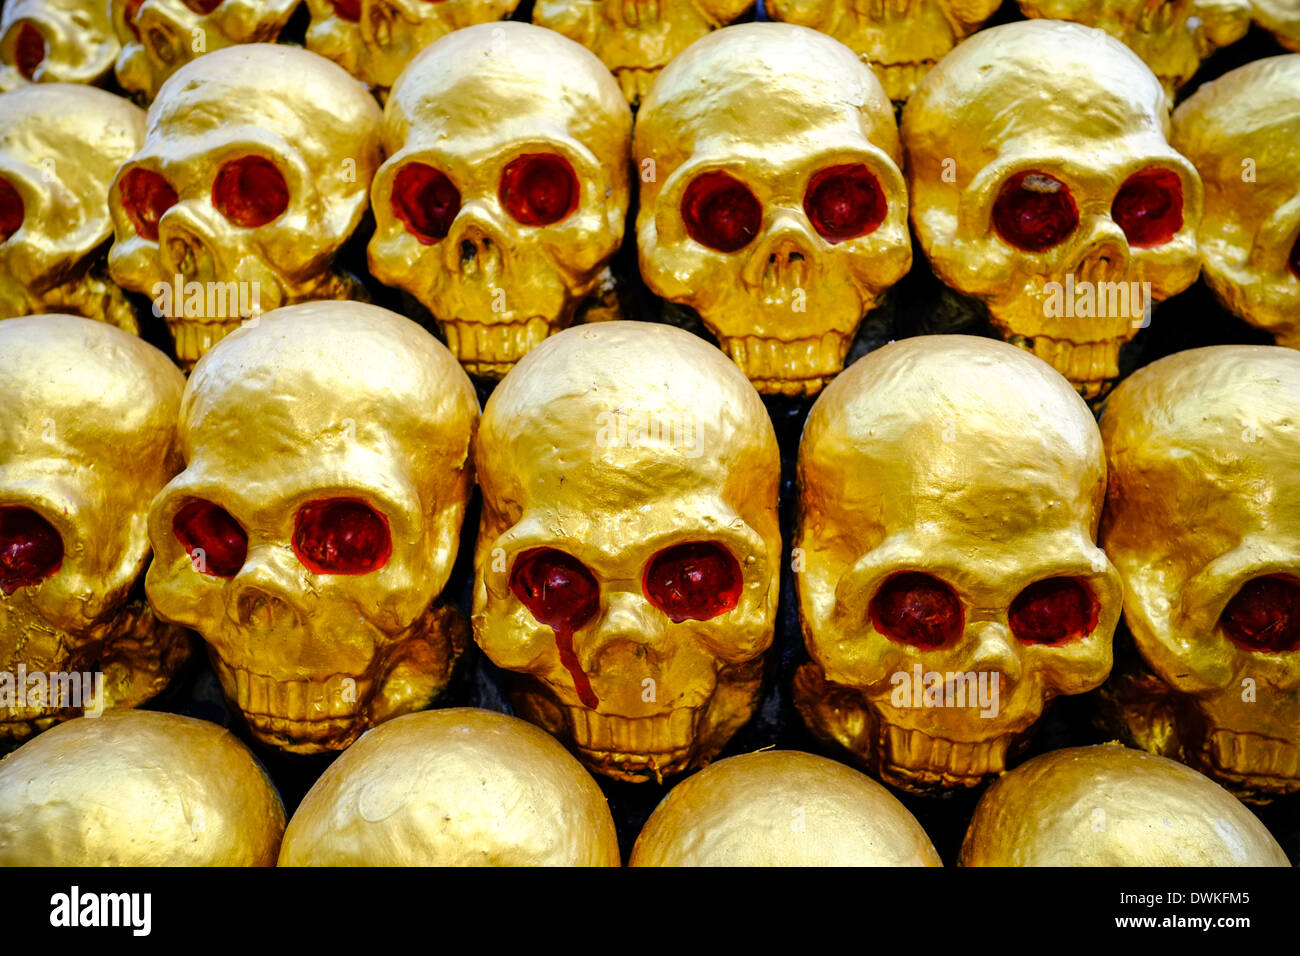 golden skulls with red painted eyes. piled in rows. temple art. Phuket, Thailand Stock Photo